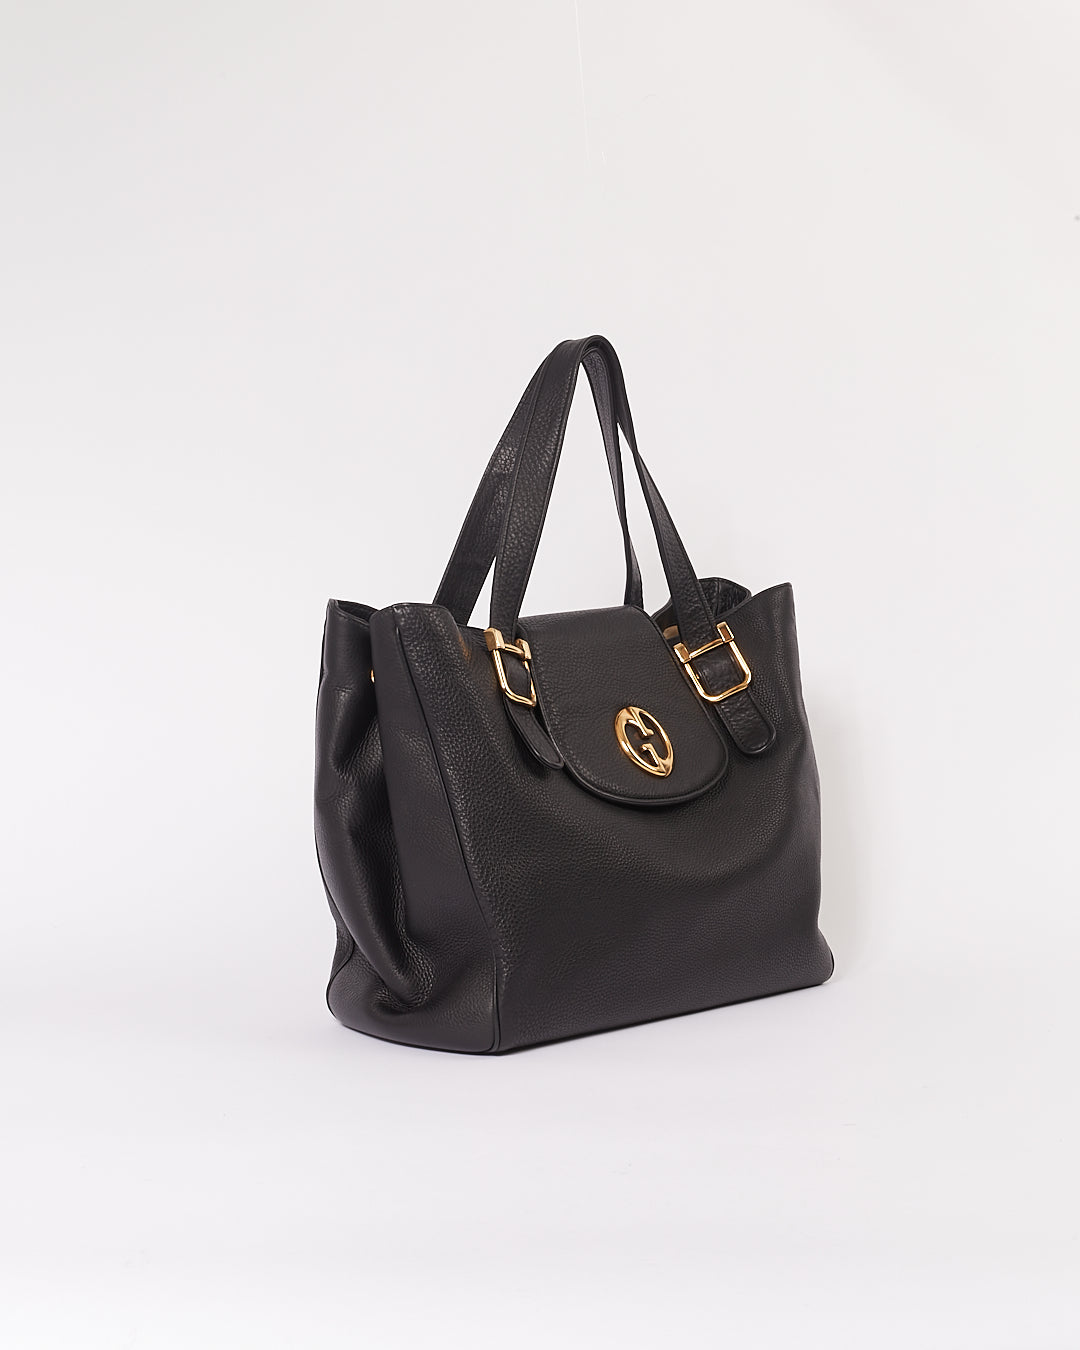 Gucci Black Pebbled Leather Tote Bag